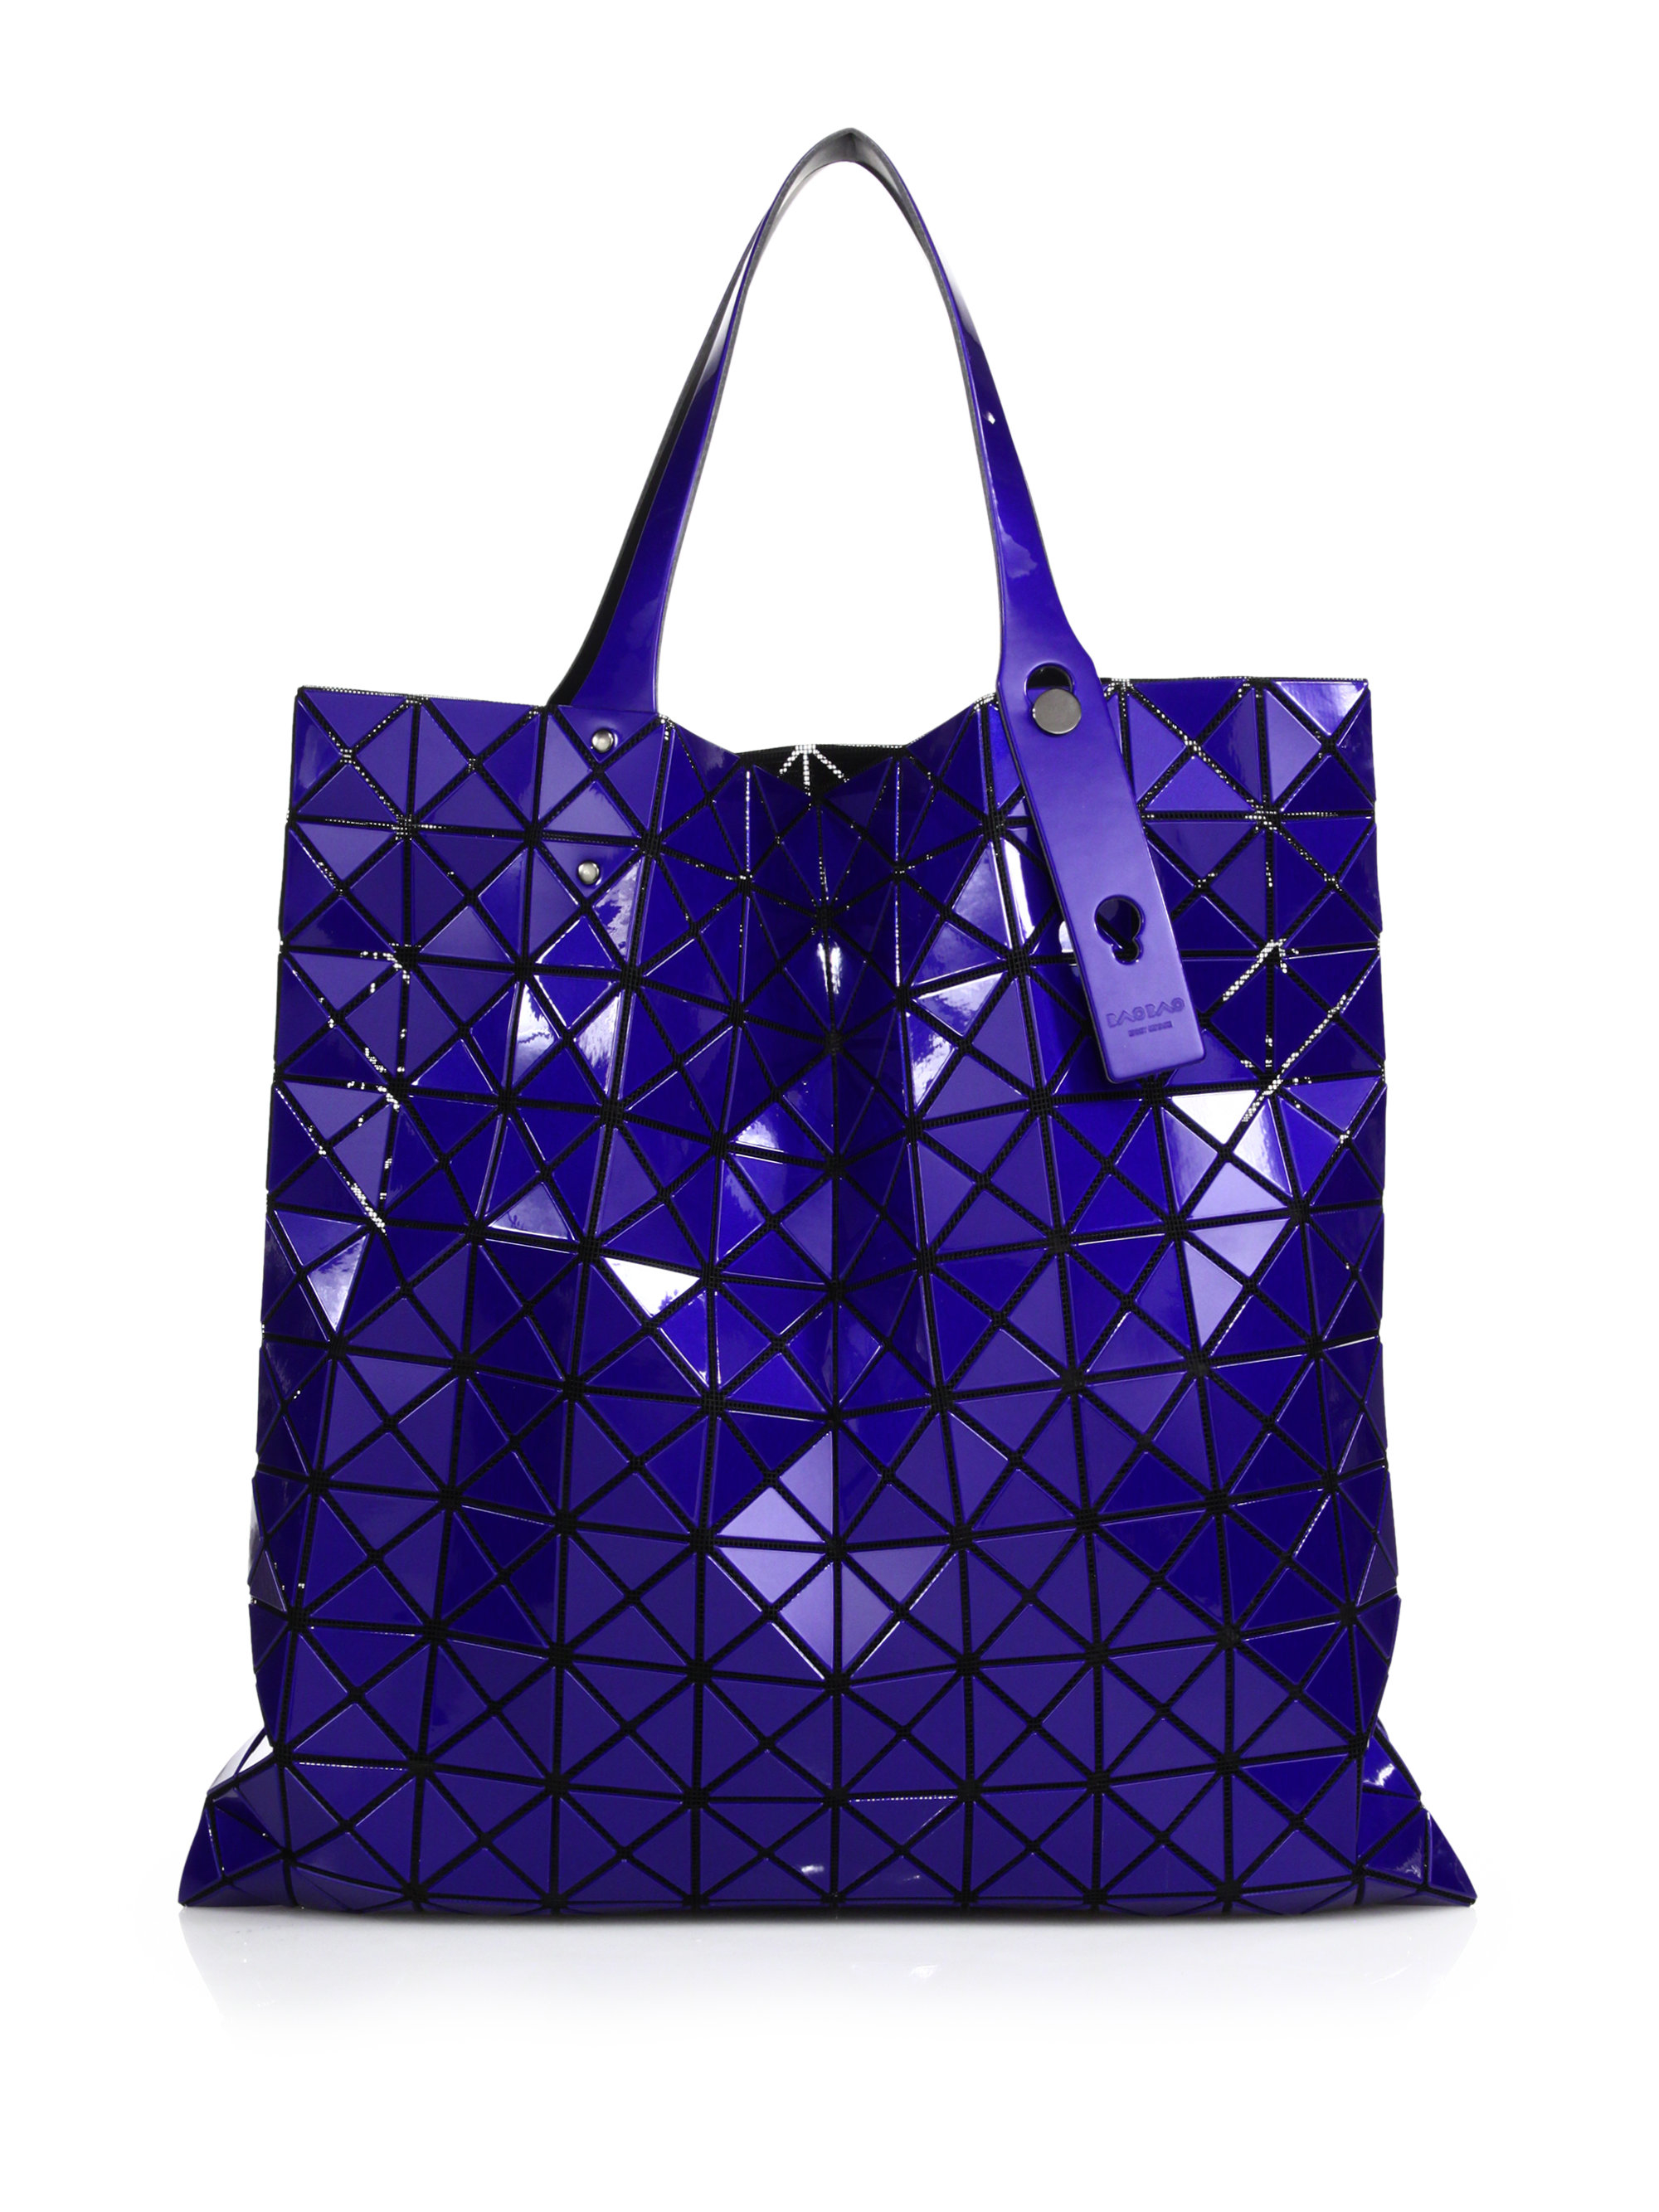 Lyst - Bao Bao Issey Miyake Prism Basic Metallic Faux Leather Tote in Blue